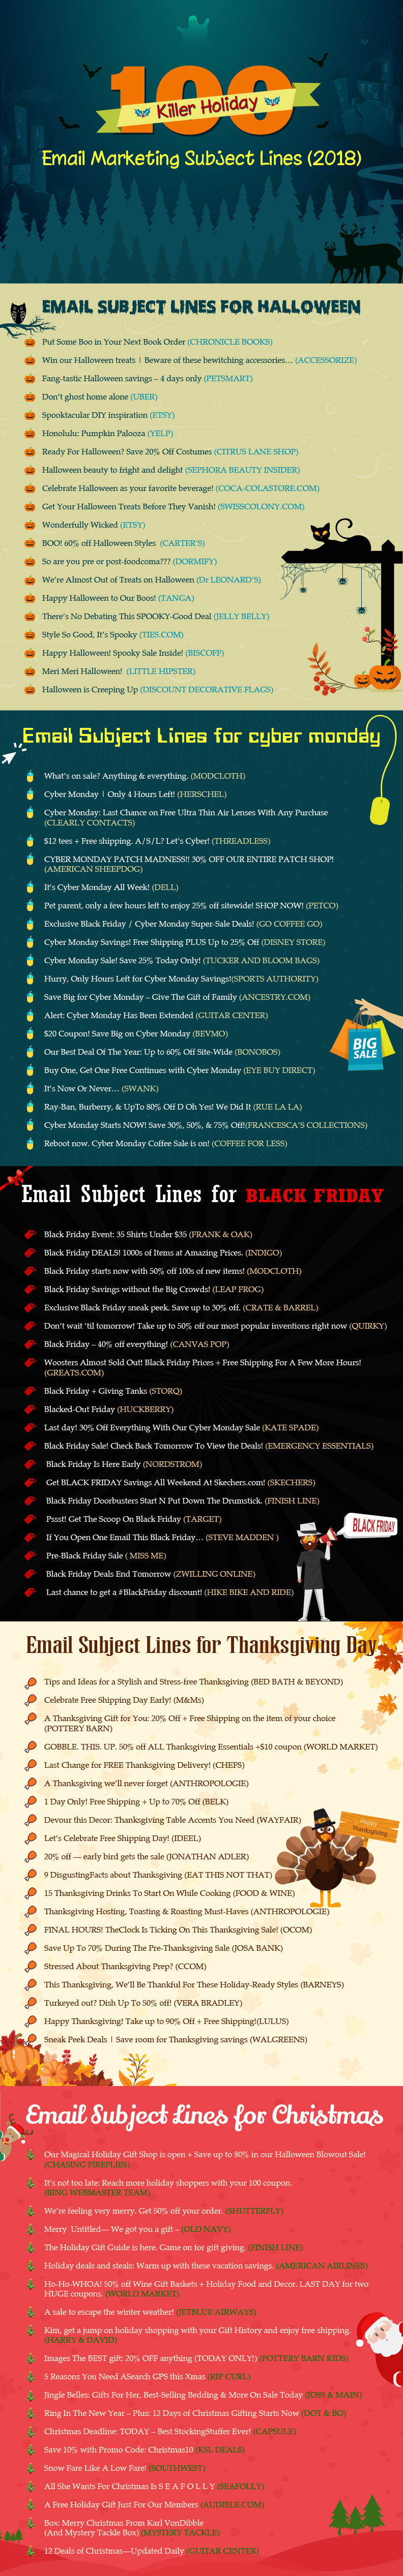 Infographic 100 Killer Holiday Email Marketing Subject Lines